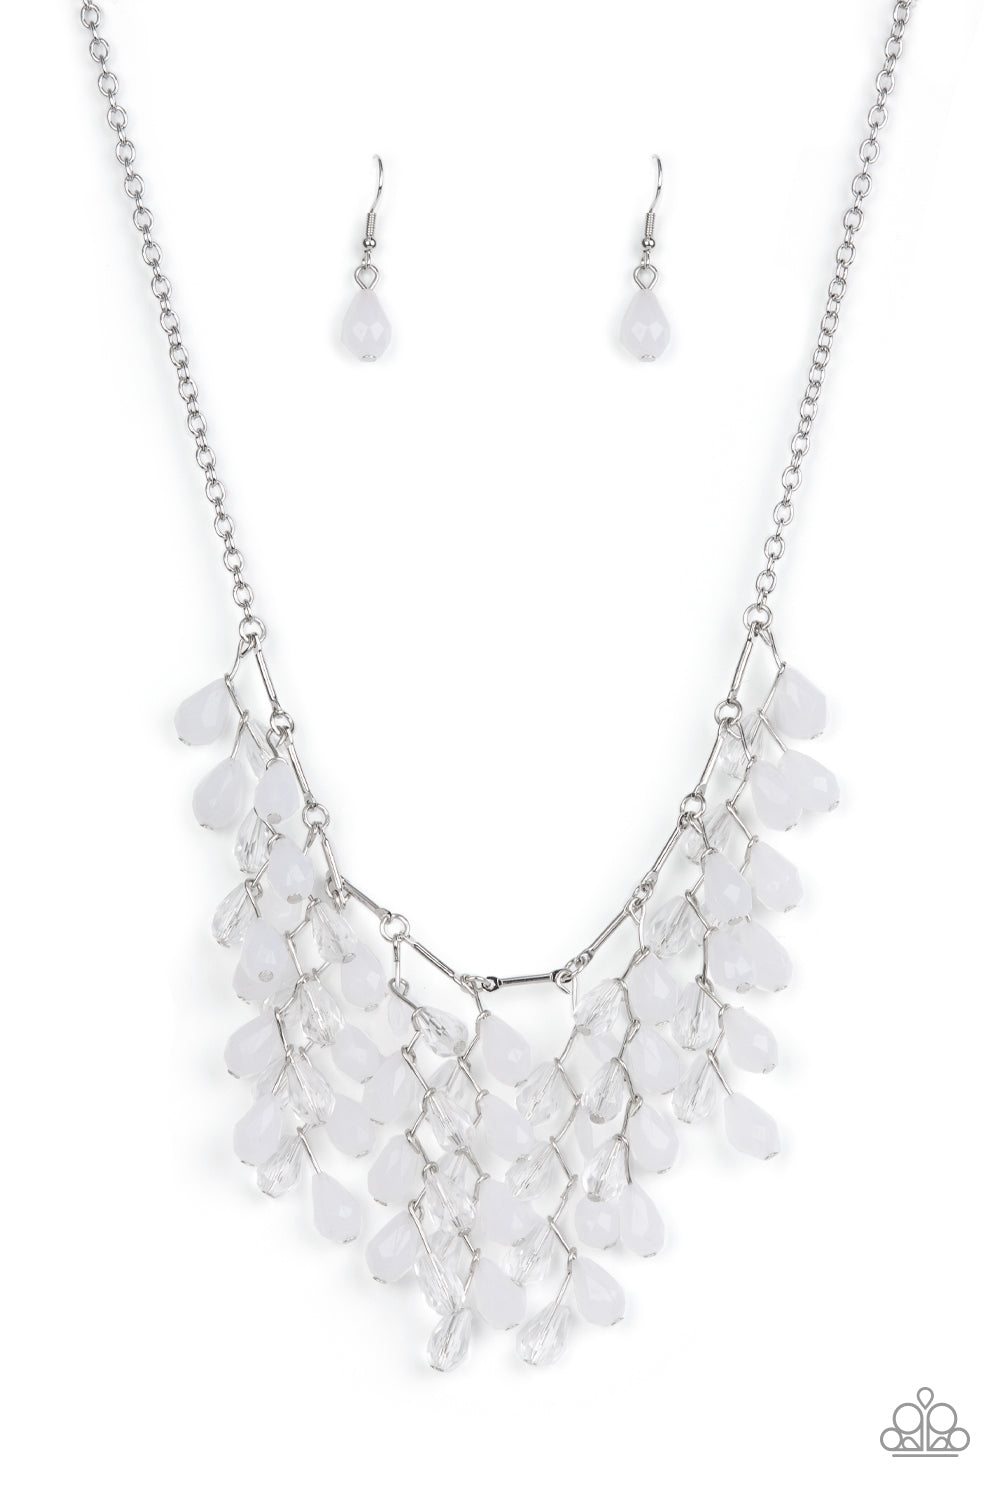 Garden Fairytale White Necklace - Paparazzi Accessories  A shimmery collection of opaque and clear crystal-like teardrop beads delicately cluster along a linked strand of silver bars, creating a frosty and leafy fringe below the collar. Features an adjustable clasp closure.  Sold as one individual necklace. Includes one pair of matching earrings.